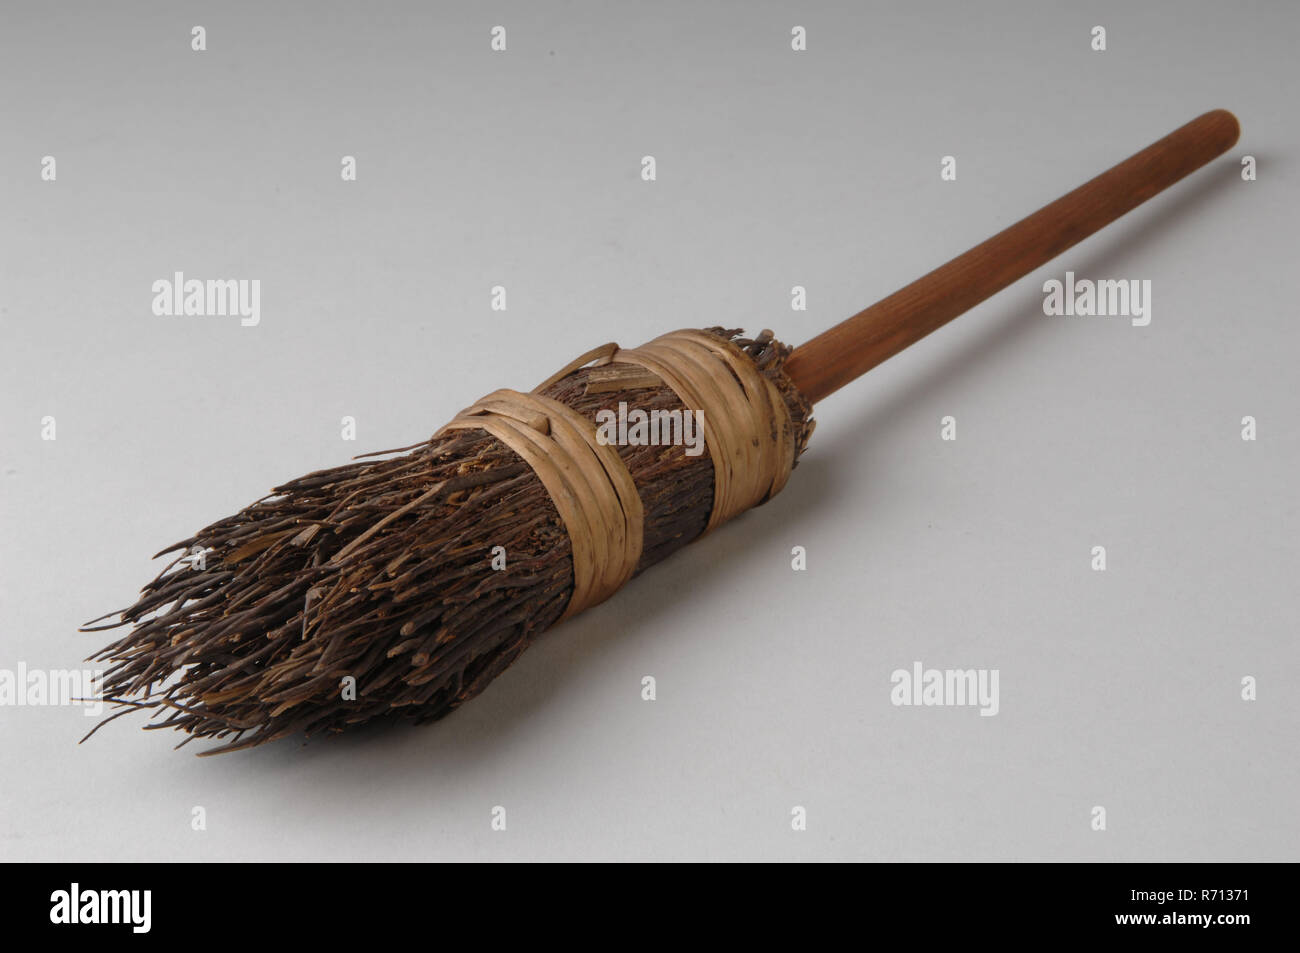 Te Poel, Wooden miniature witches broom, broom miniature kitchen utensils toy relaxant model wood rattan h 37.0, twisted bound Street broom of tied twigs on stick 1868 Sibilla van Embden playing cleaning kitchen Stock Photo